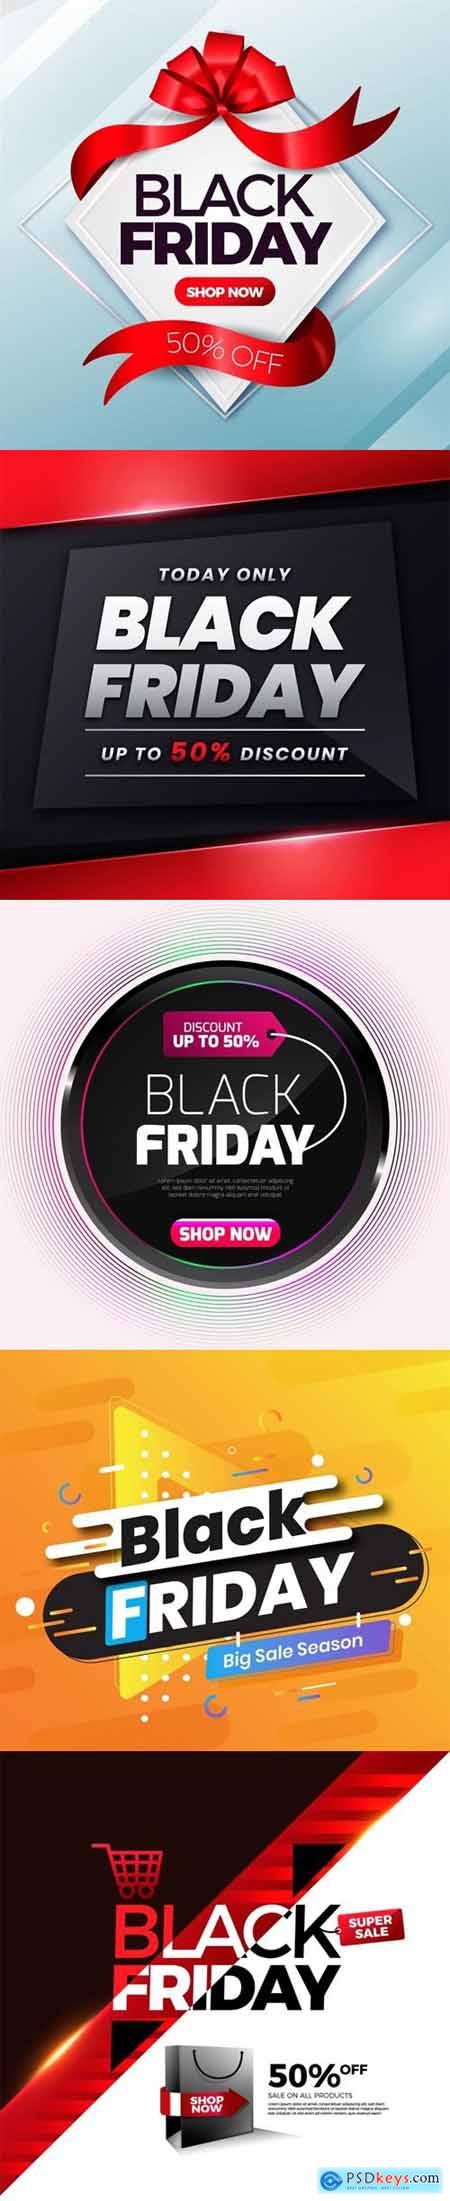 10 Black Friday Sales Banners Vector Design Templates